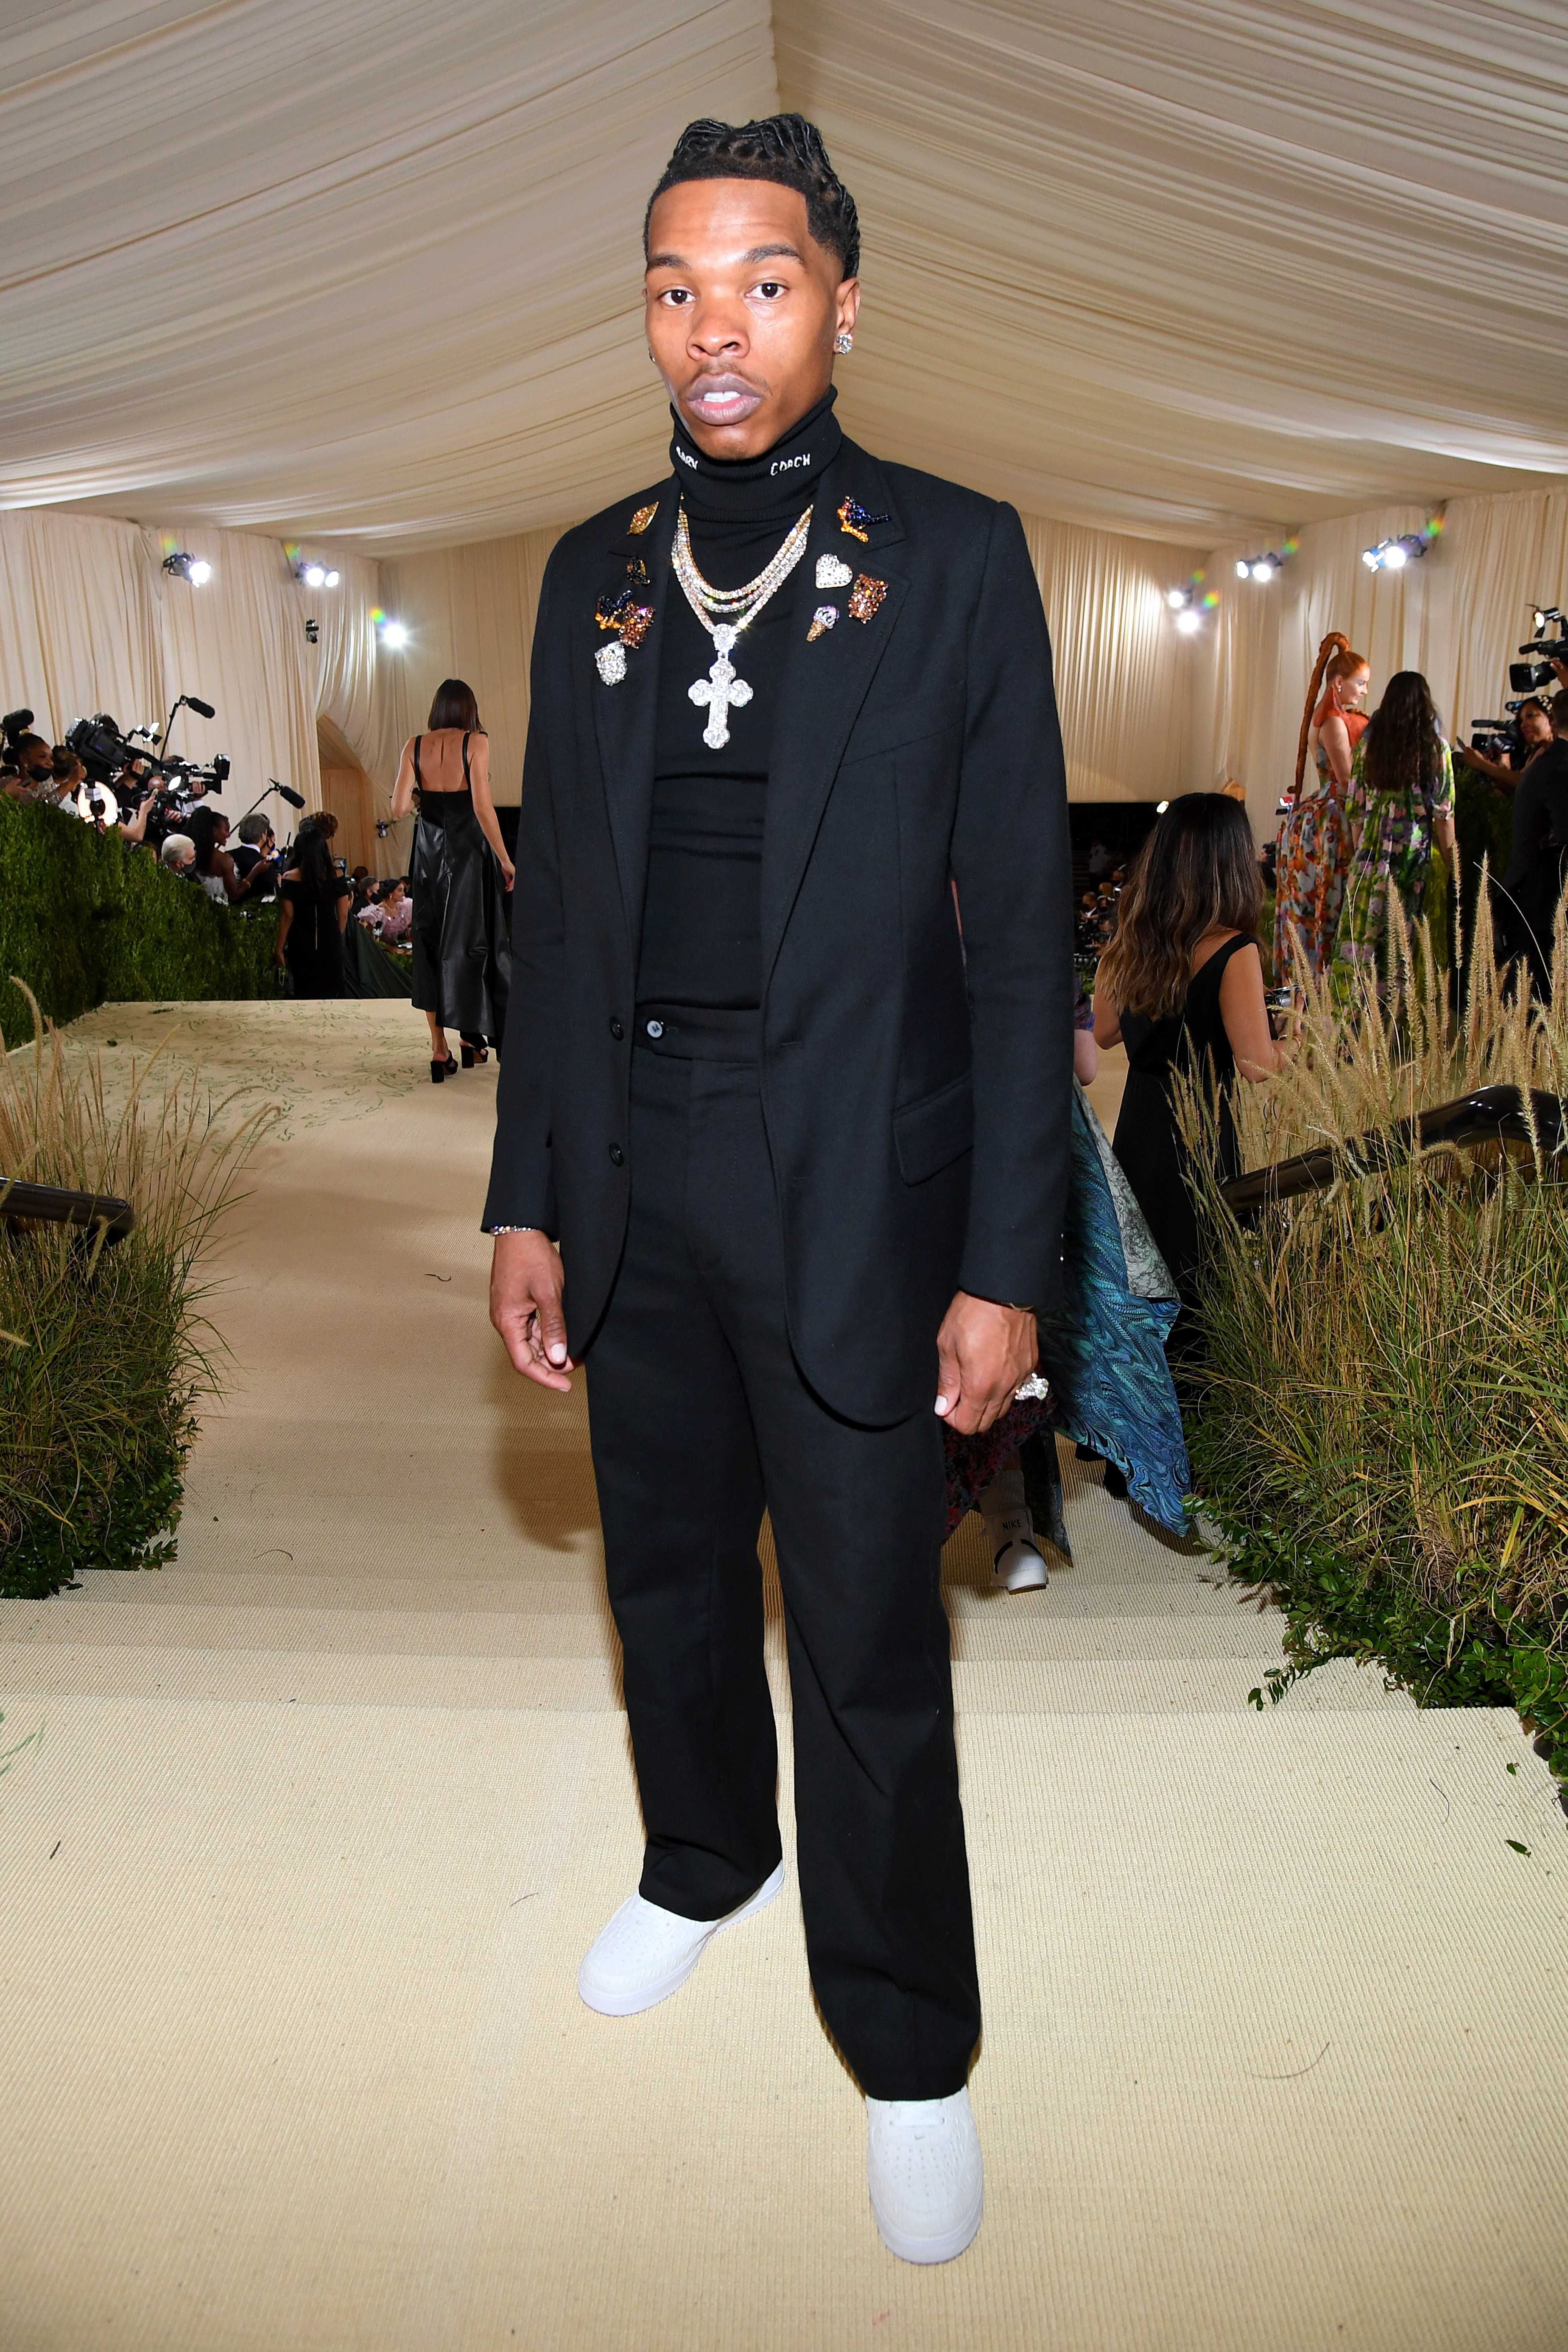 NEW YORK, NEW YORK - SEPTEMBER 13: Lil Baby attends The 2021 Met Gala Celebrating In America: A Lexicon Of Fashion at Metropolitan Museum of Art on September 13, 2021 in New York City. (Photo by Kevin Mazur/MG21/Getty Images For The Met Museum/Vogue) (Foto: Getty Images For The Met Museum/)